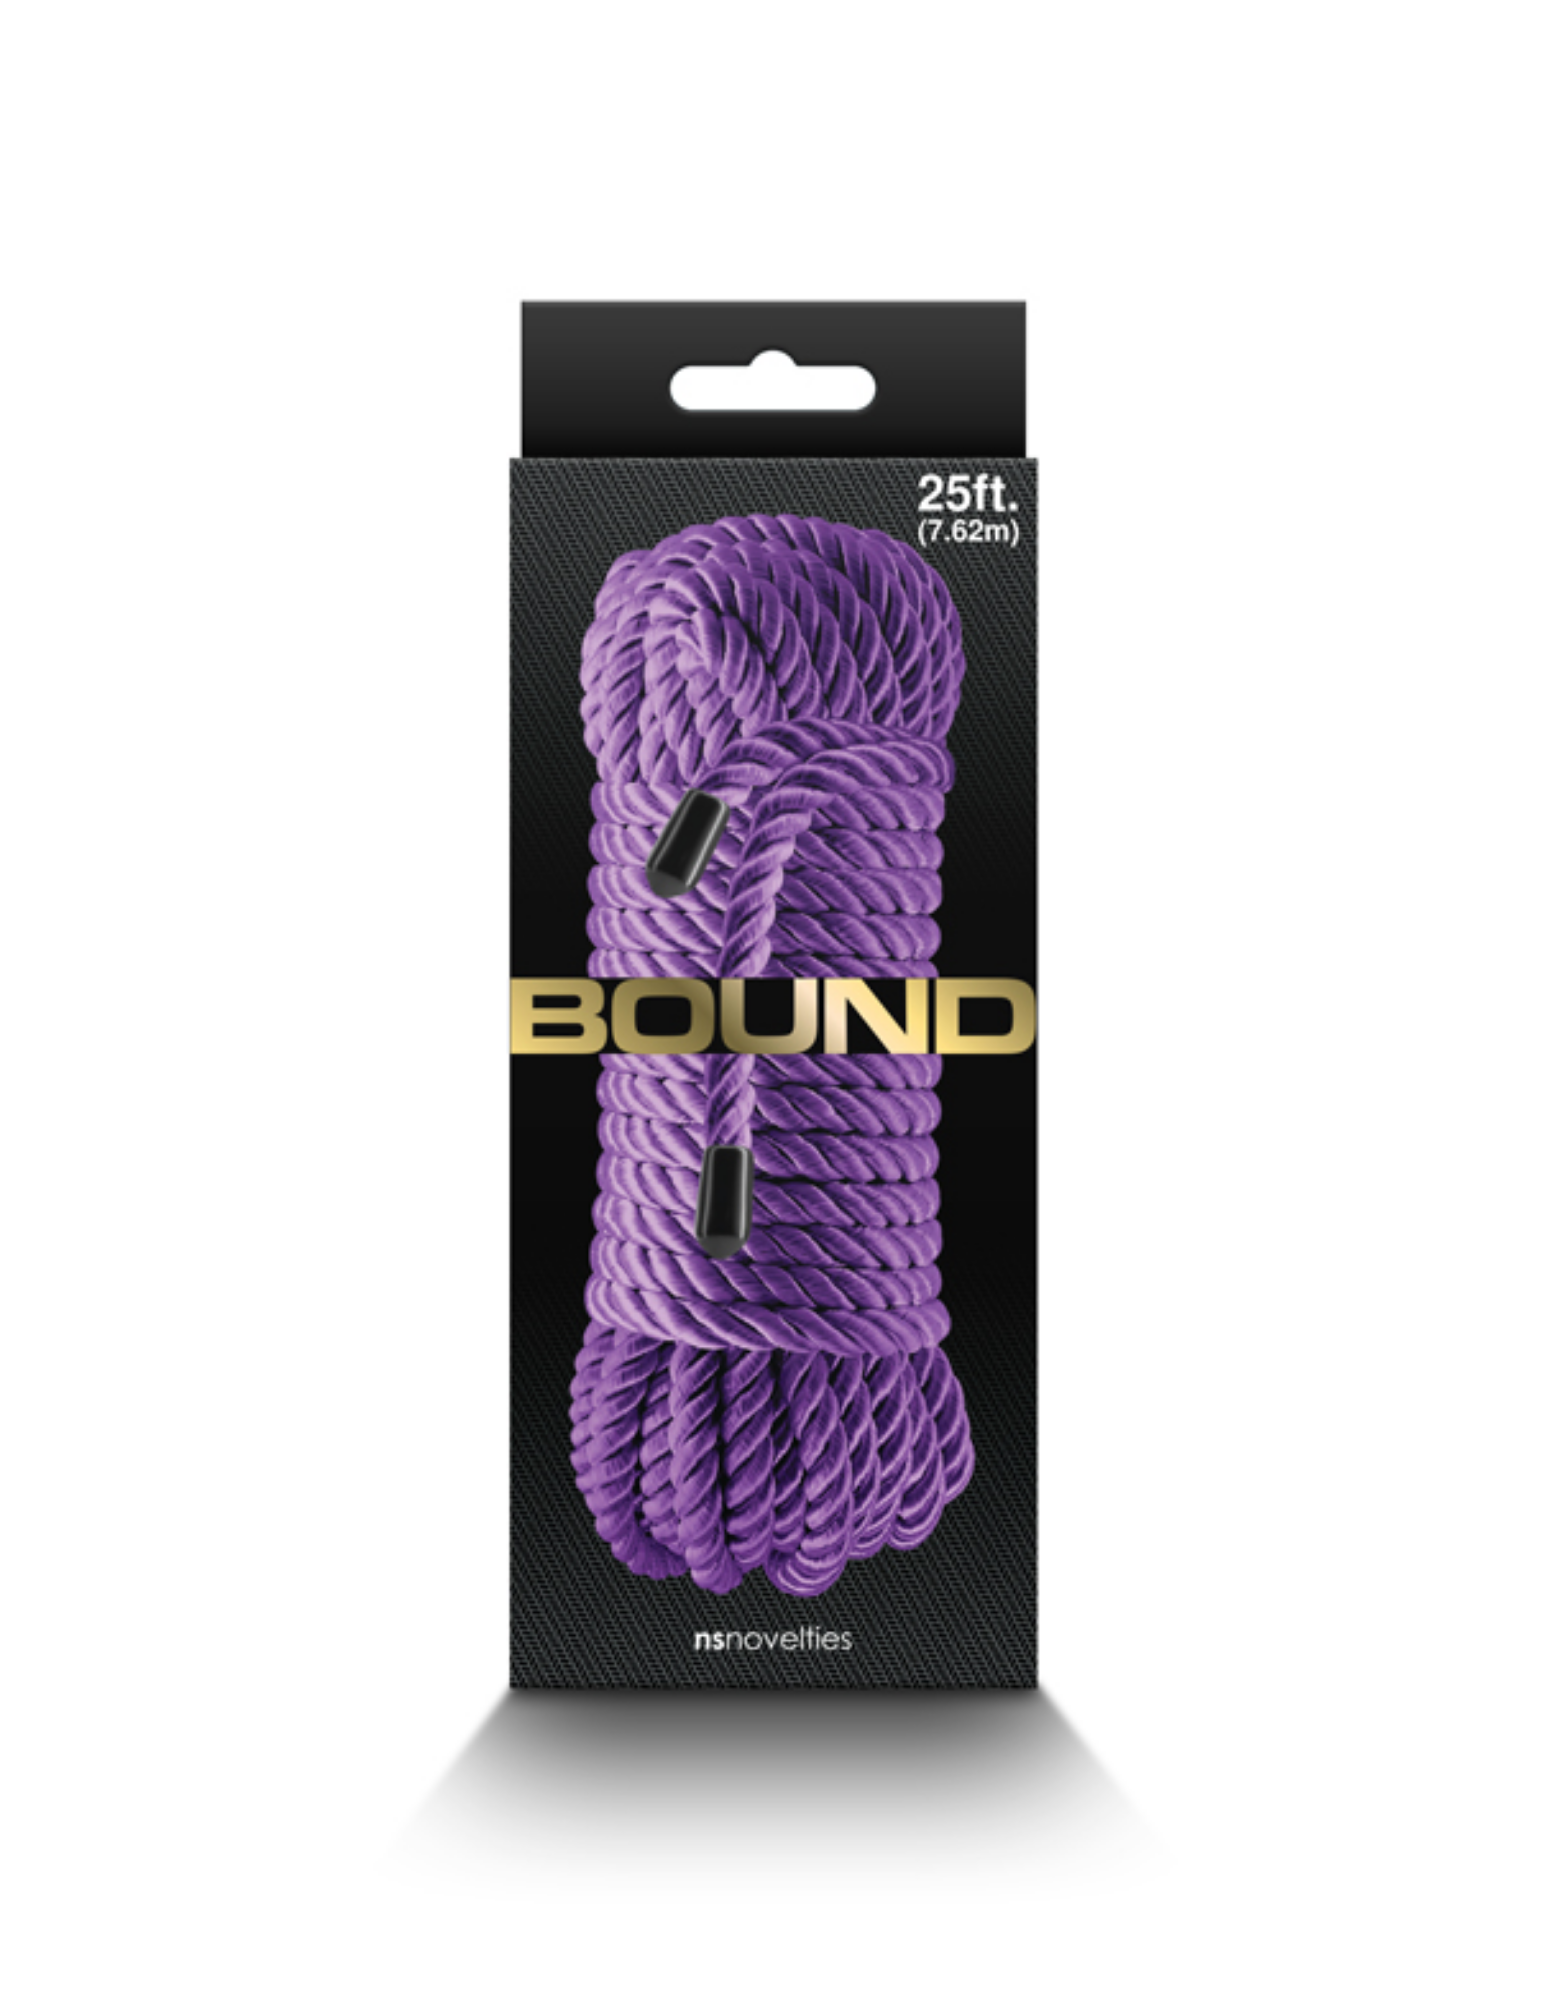 Photo of the box for the Bound Rope from NS Novelties (purple).